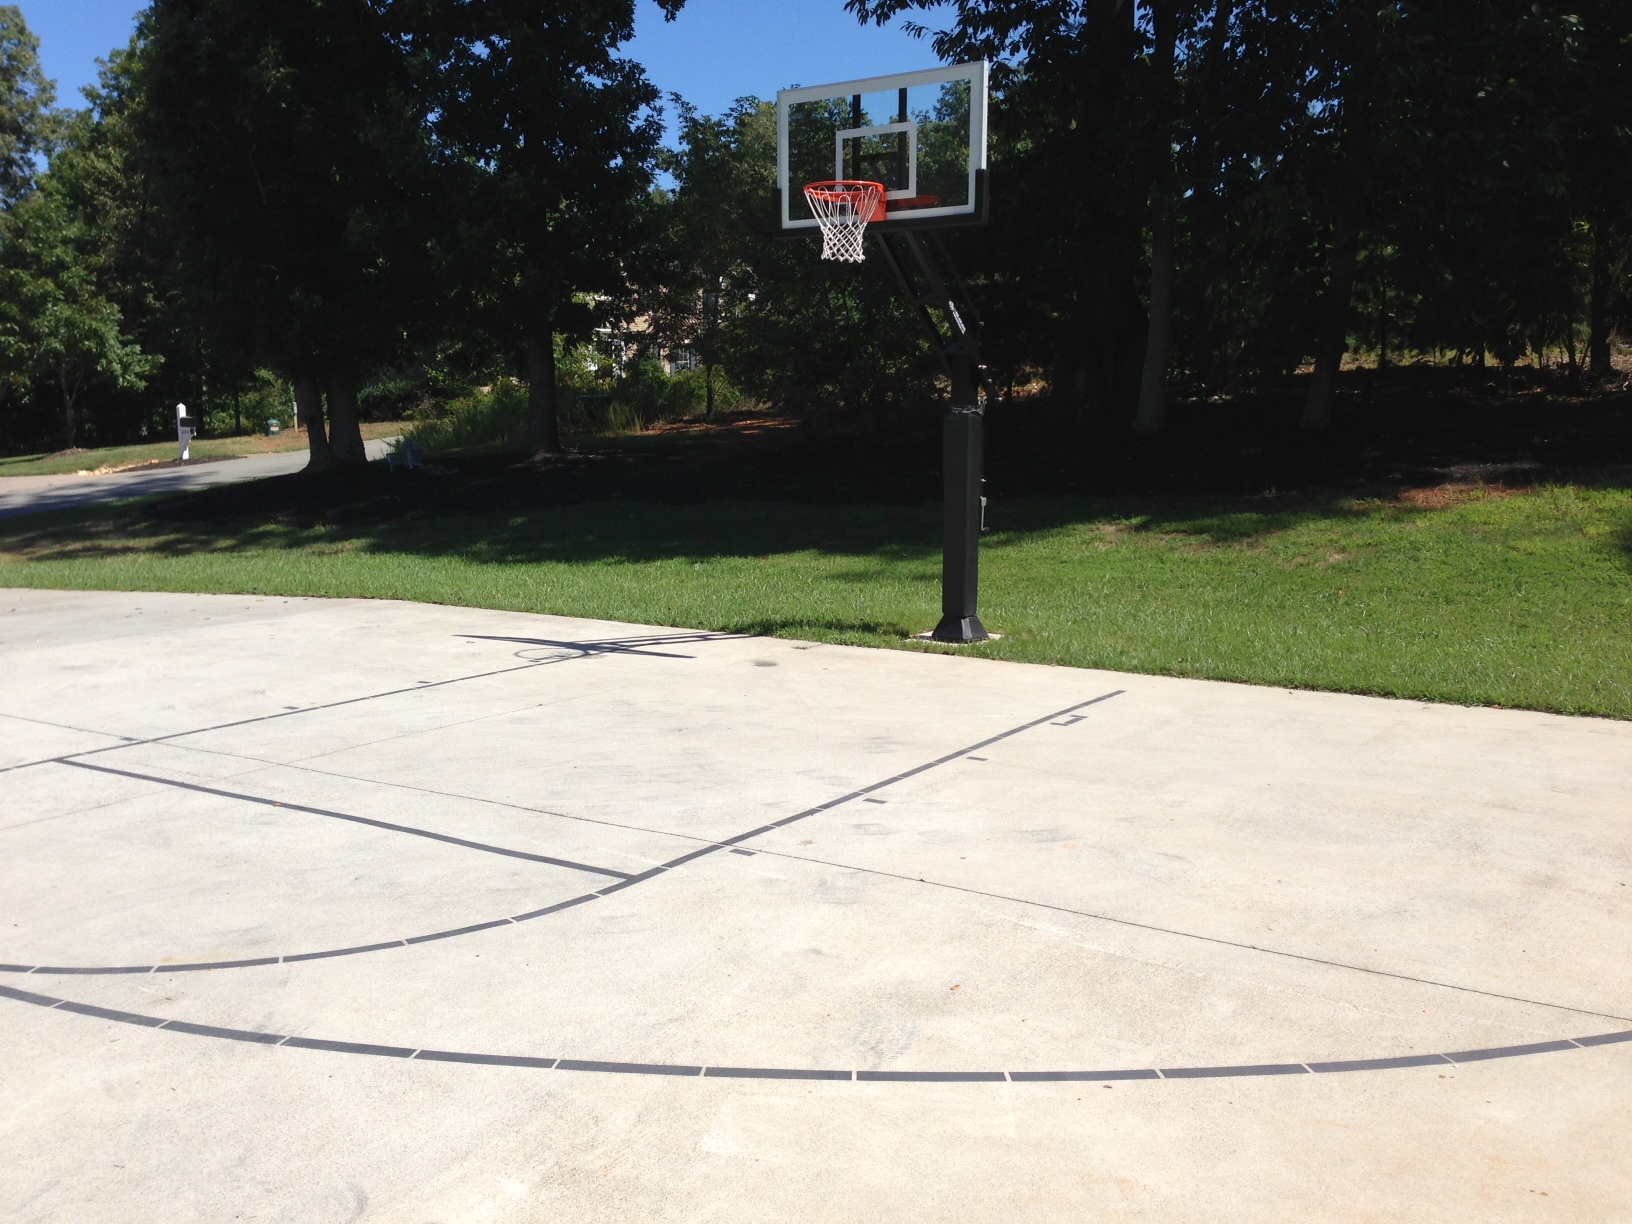 Striped half court driveways with a Pro Dunk Hoop System, like this Gold, beat plain driveways every time.